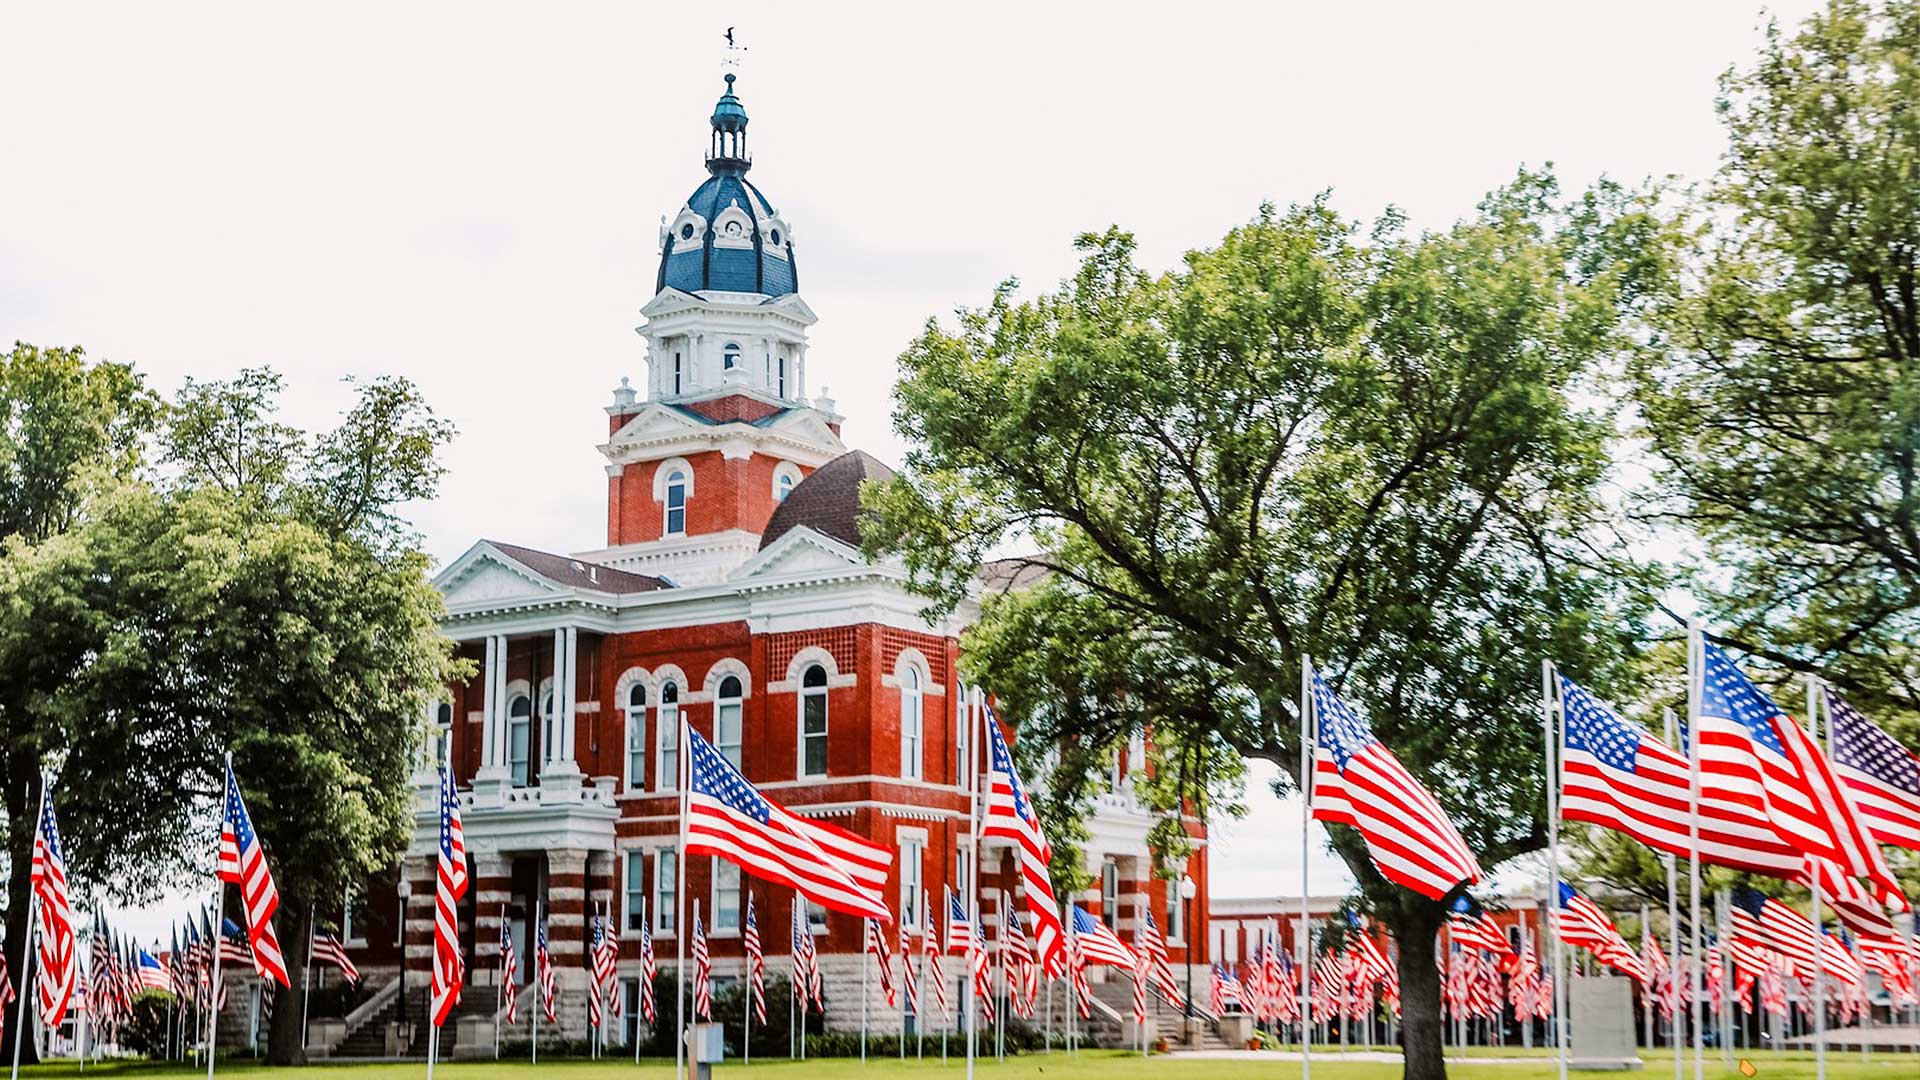 Courthouse and Flags